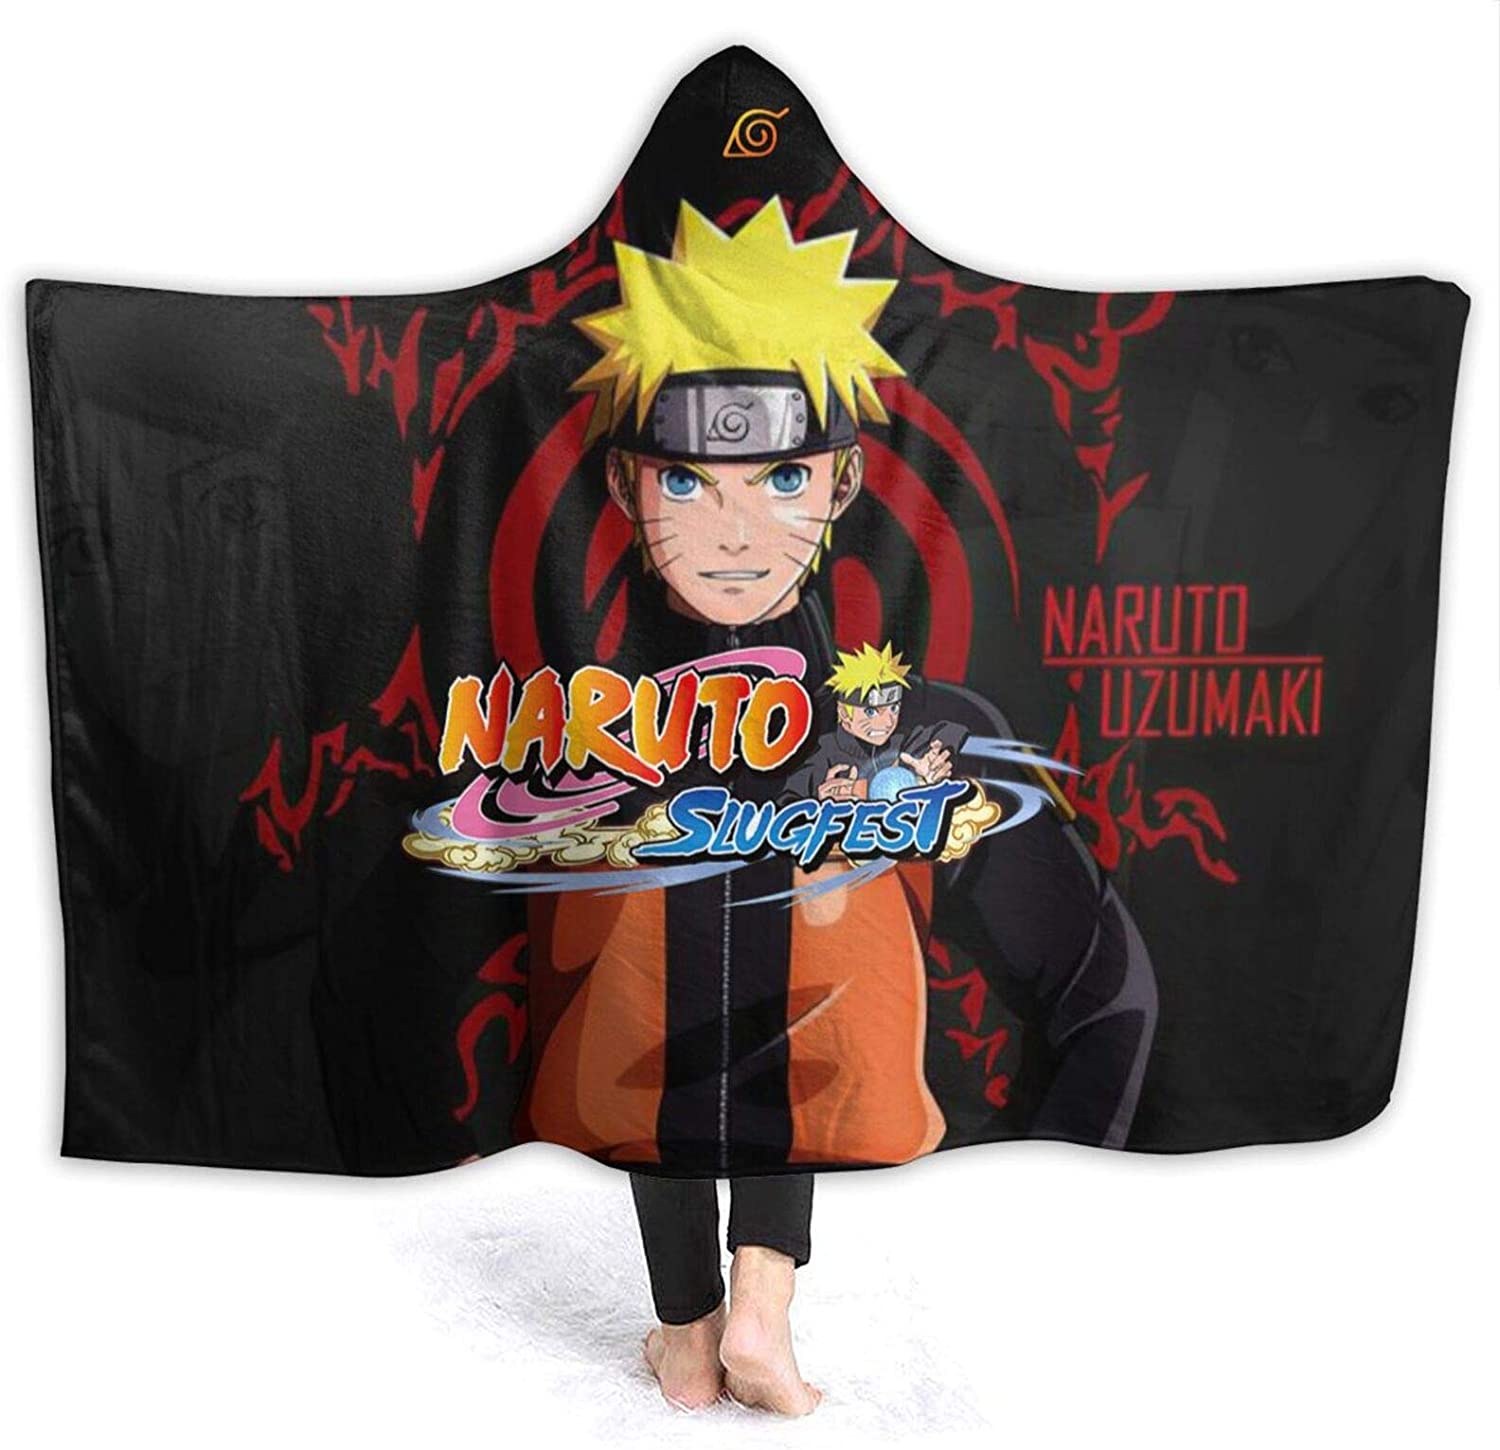 Anime Naruto 3D Printing Plush Fleece Blanket Adult Fashion Quilts Home  Office Washable Duvet Casual Kids Sherpa Blanket 01 From Erikaning, $46.65  | DHgate.Com | Better Than Pottery Barn, Crate & Barrel.